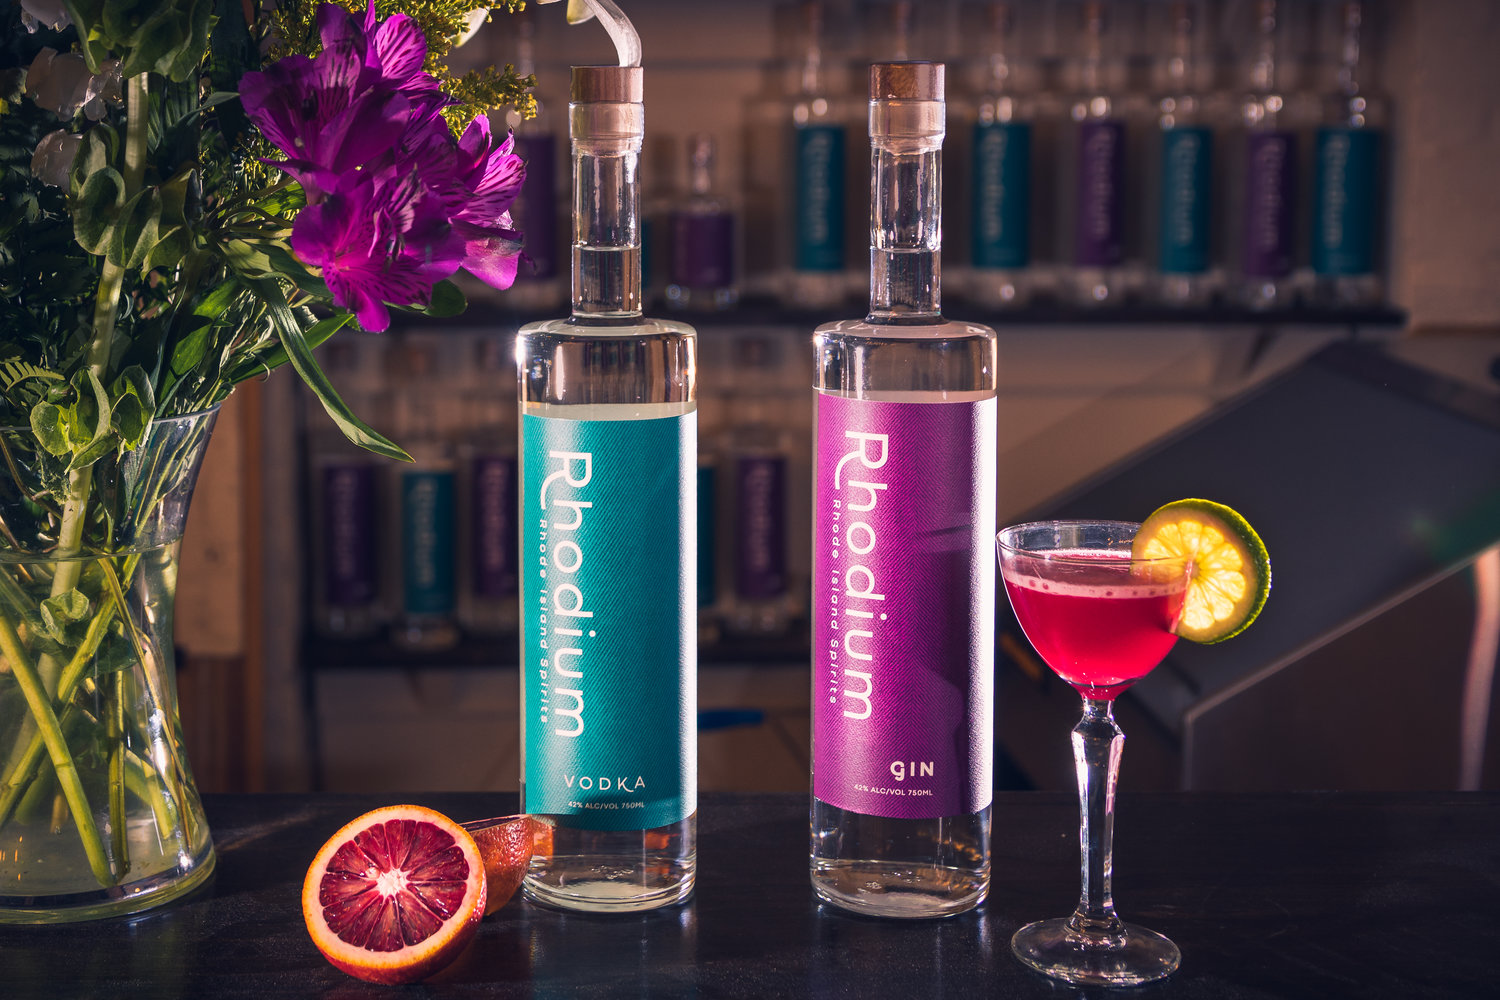 Rhode Island Spirits is new to the scene, offering inventively flavored vodka and gin